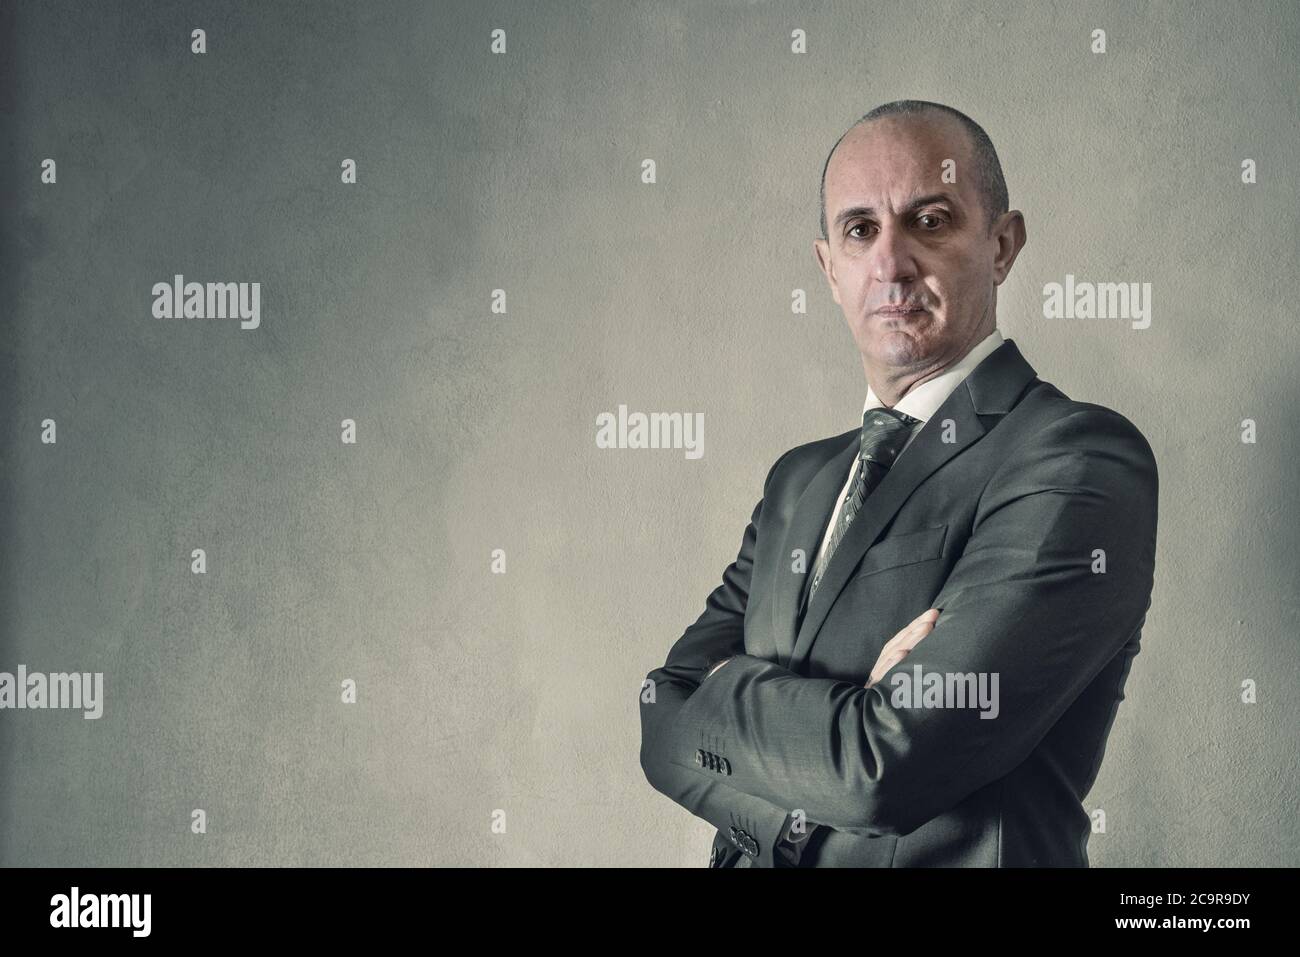 a businessman with serious look Stock Photo